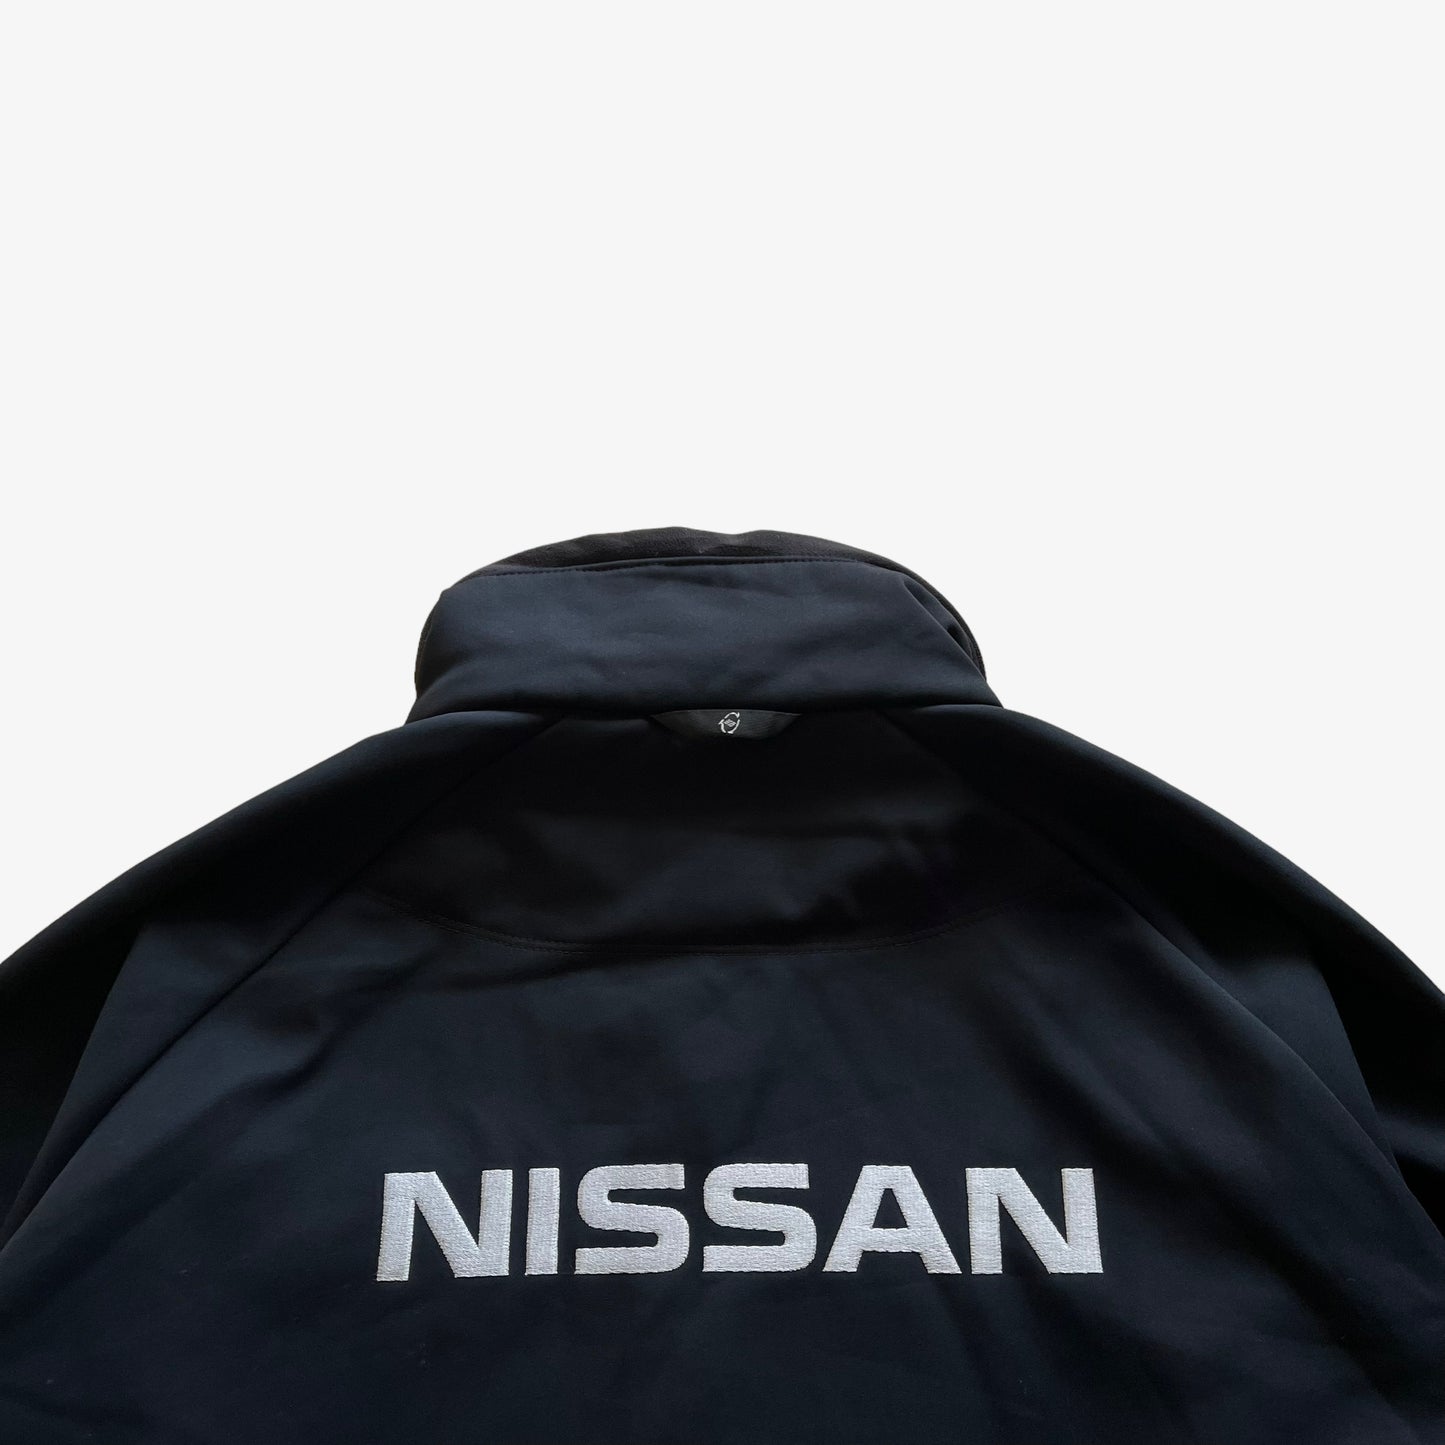 Vintage Y2K Mens Columbia Titanium Nissan Jacket With Embroidered Spell Out Collar - Casspios Dream